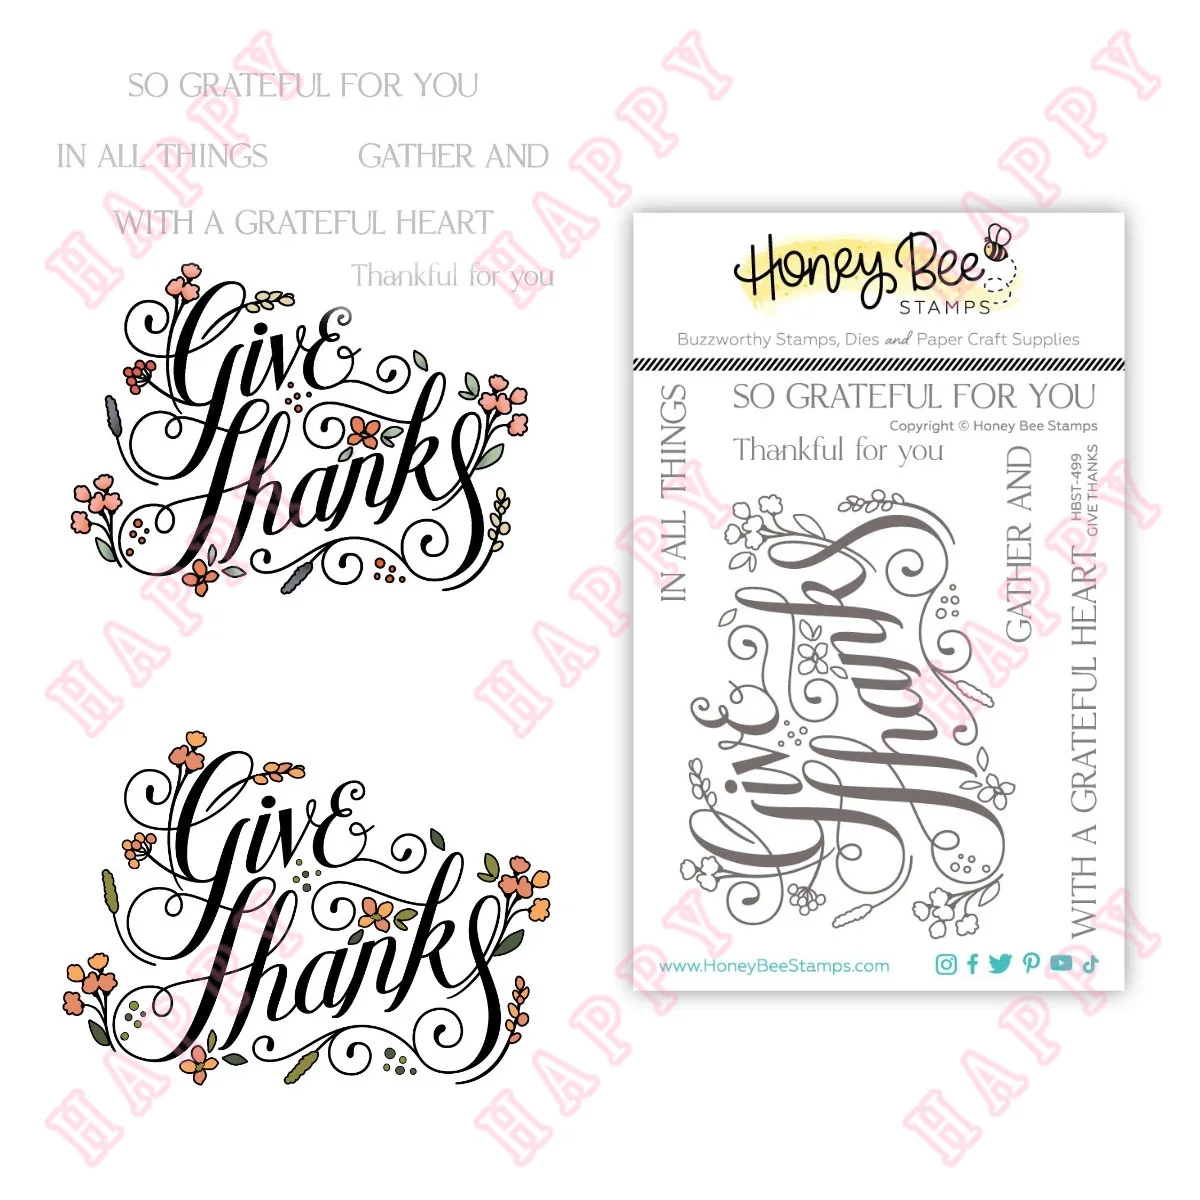 

Metal Craft Cutting Dies Stamps Stencils Give Thanks DIY Scrapbook Envelope Greeting Card Decorative Embossing Handcraft Paper